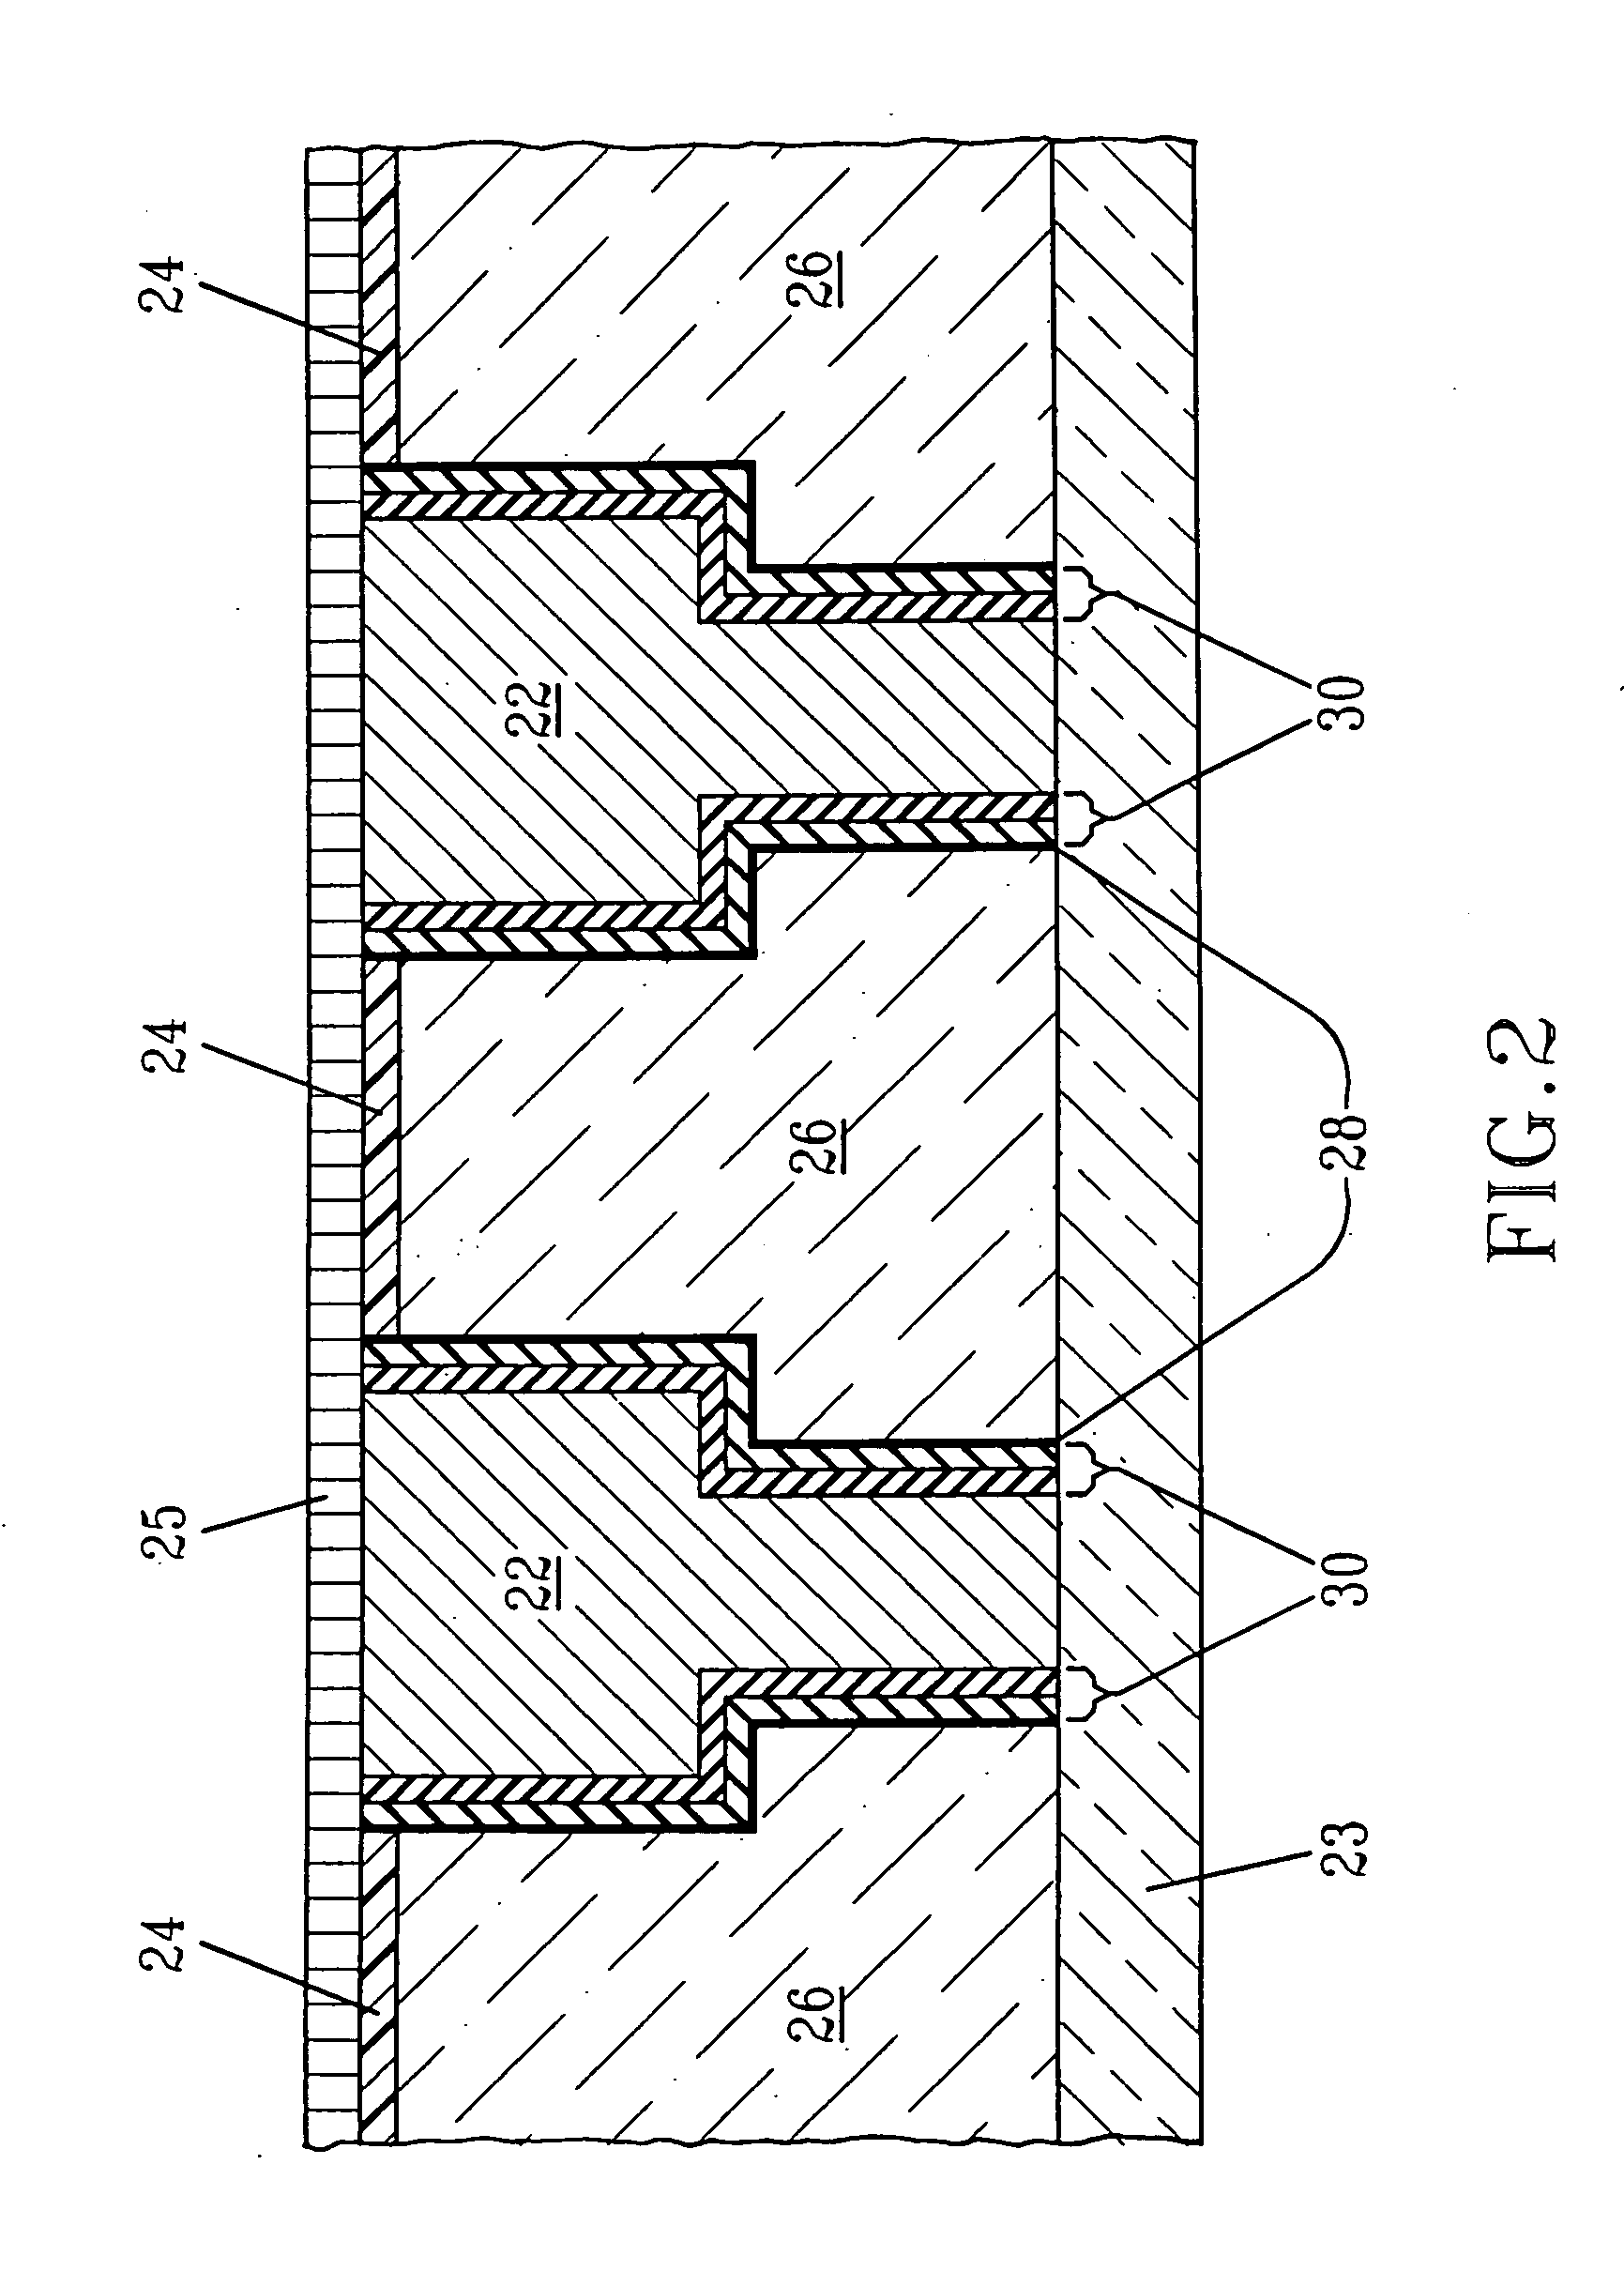 Structures and methods for intergration of ultralow-k dielectrics with improved reliability